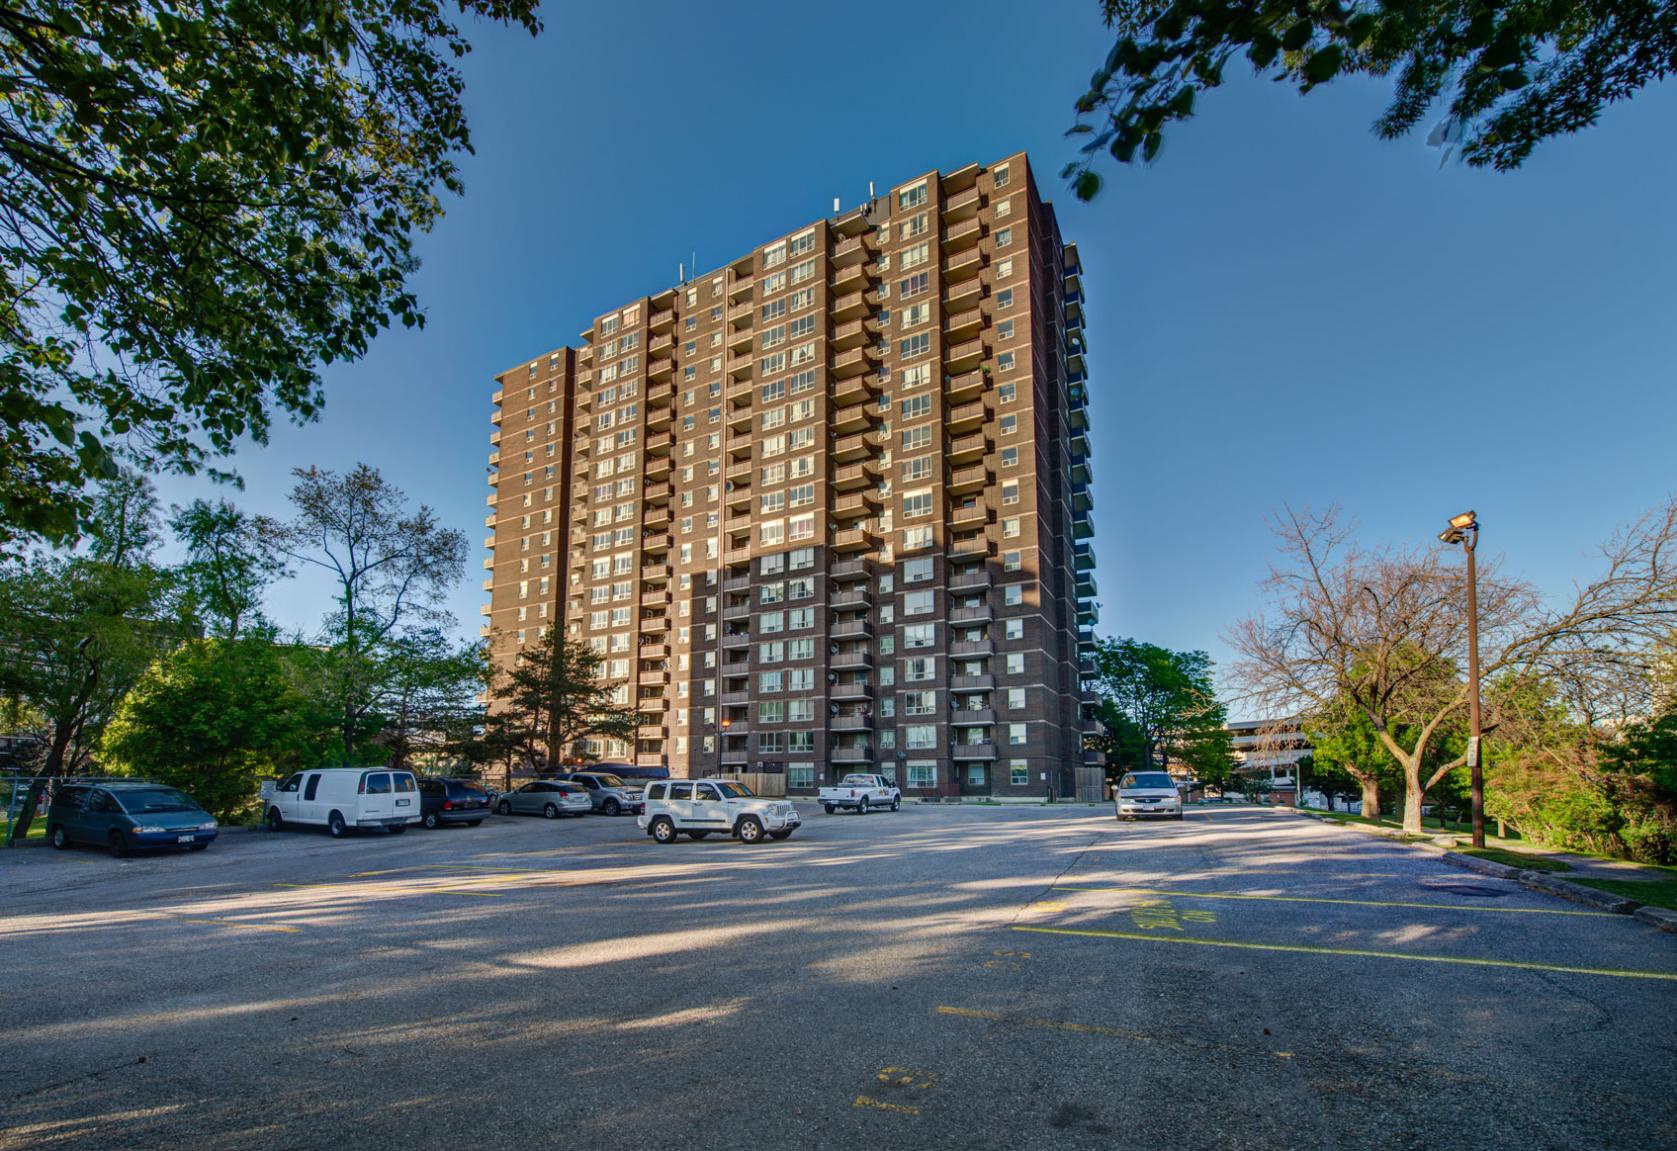 2600 Don Mills Rd., Toronto, is For Rent | Rentals.ca